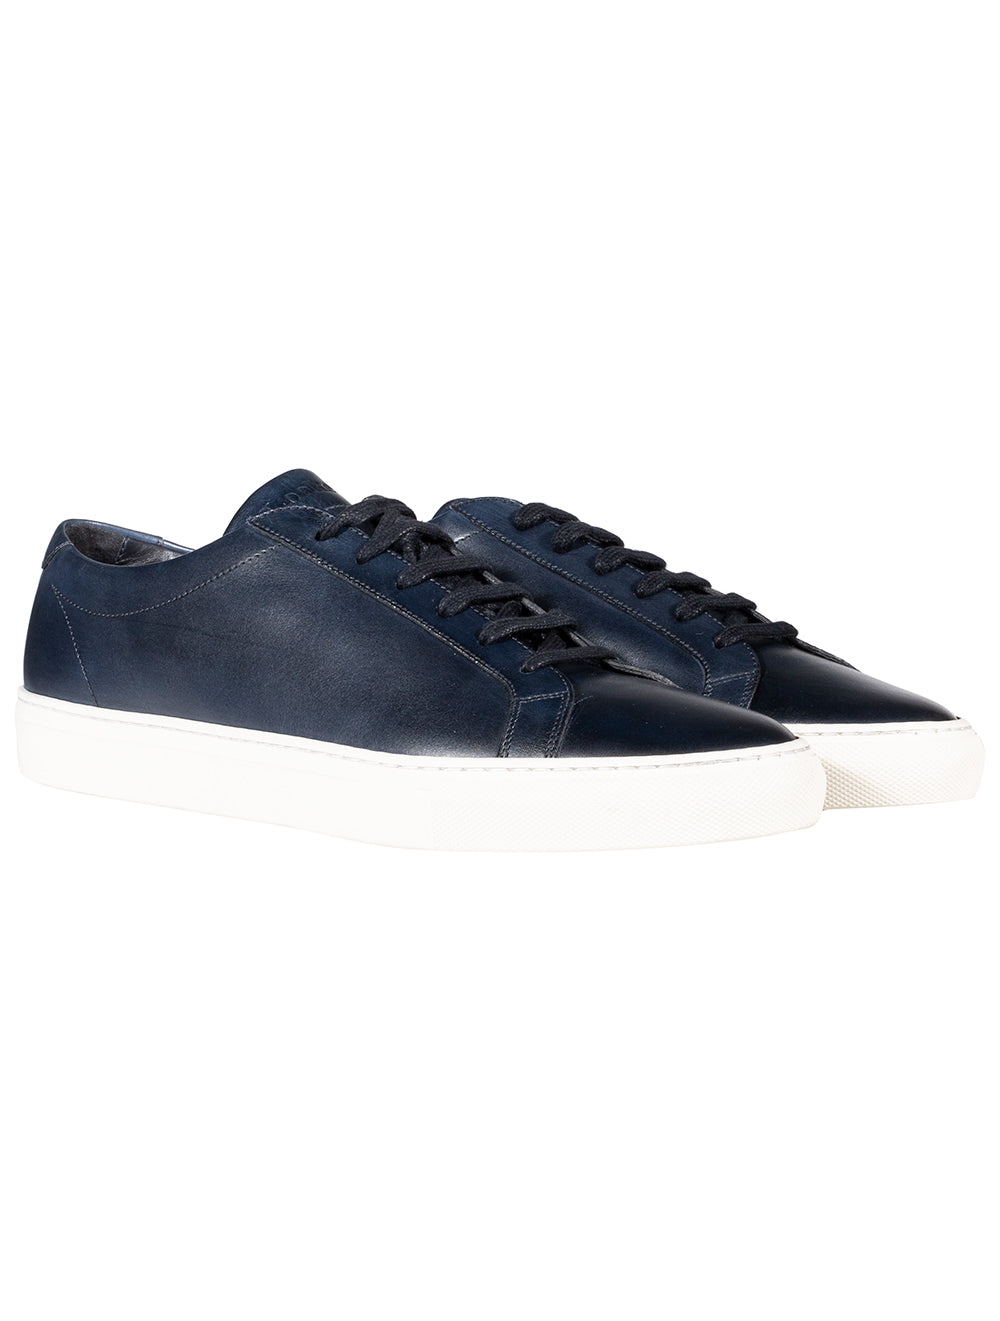 LOAKE Sprint Leather Sneaker Navy